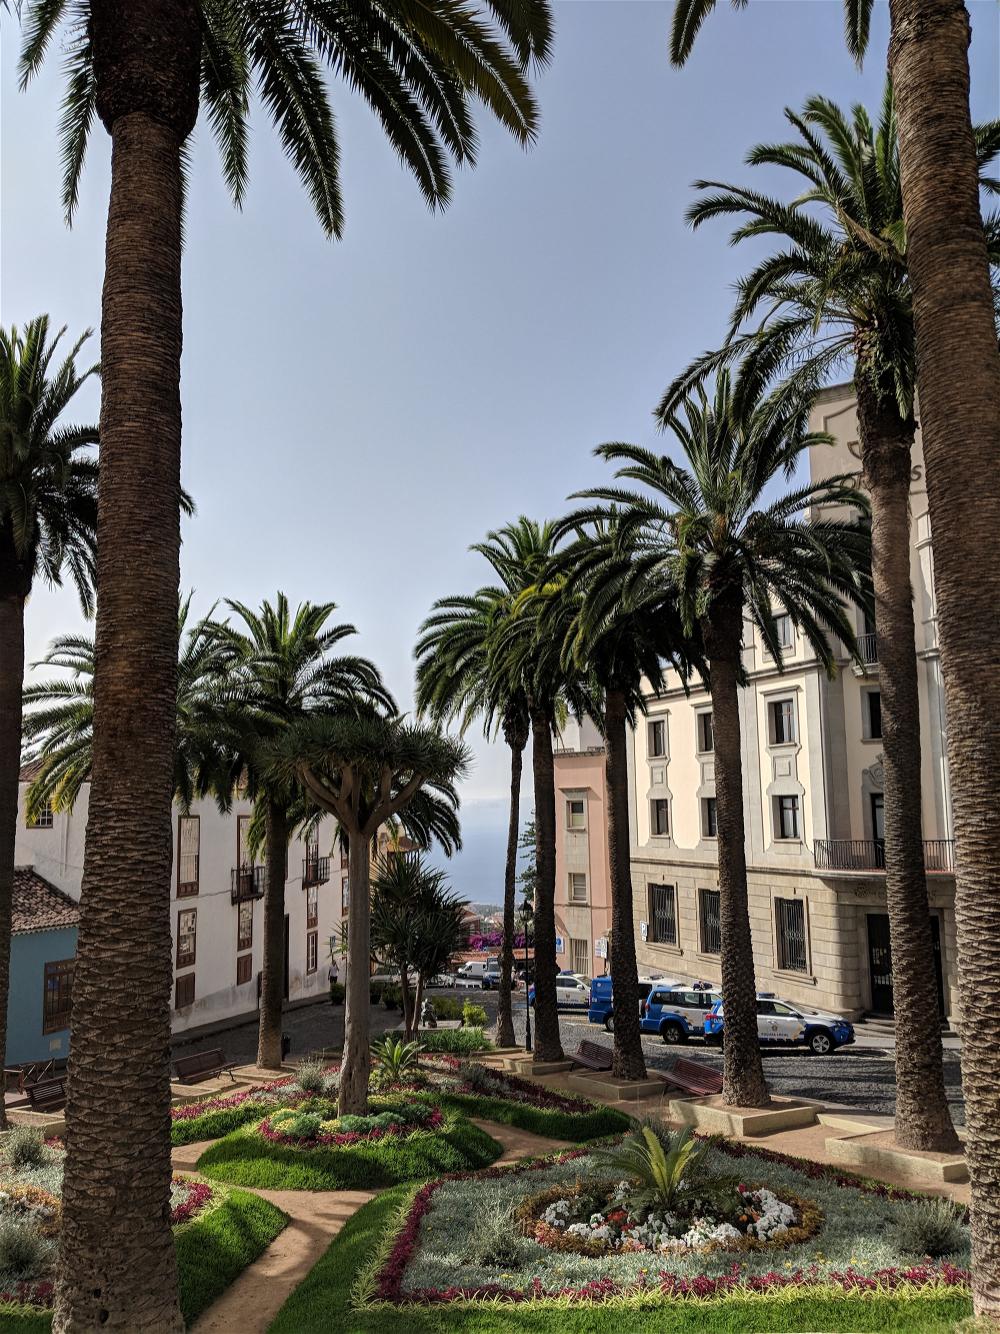 Historic Canary Islands style outdoor palm tree garden in downtown area